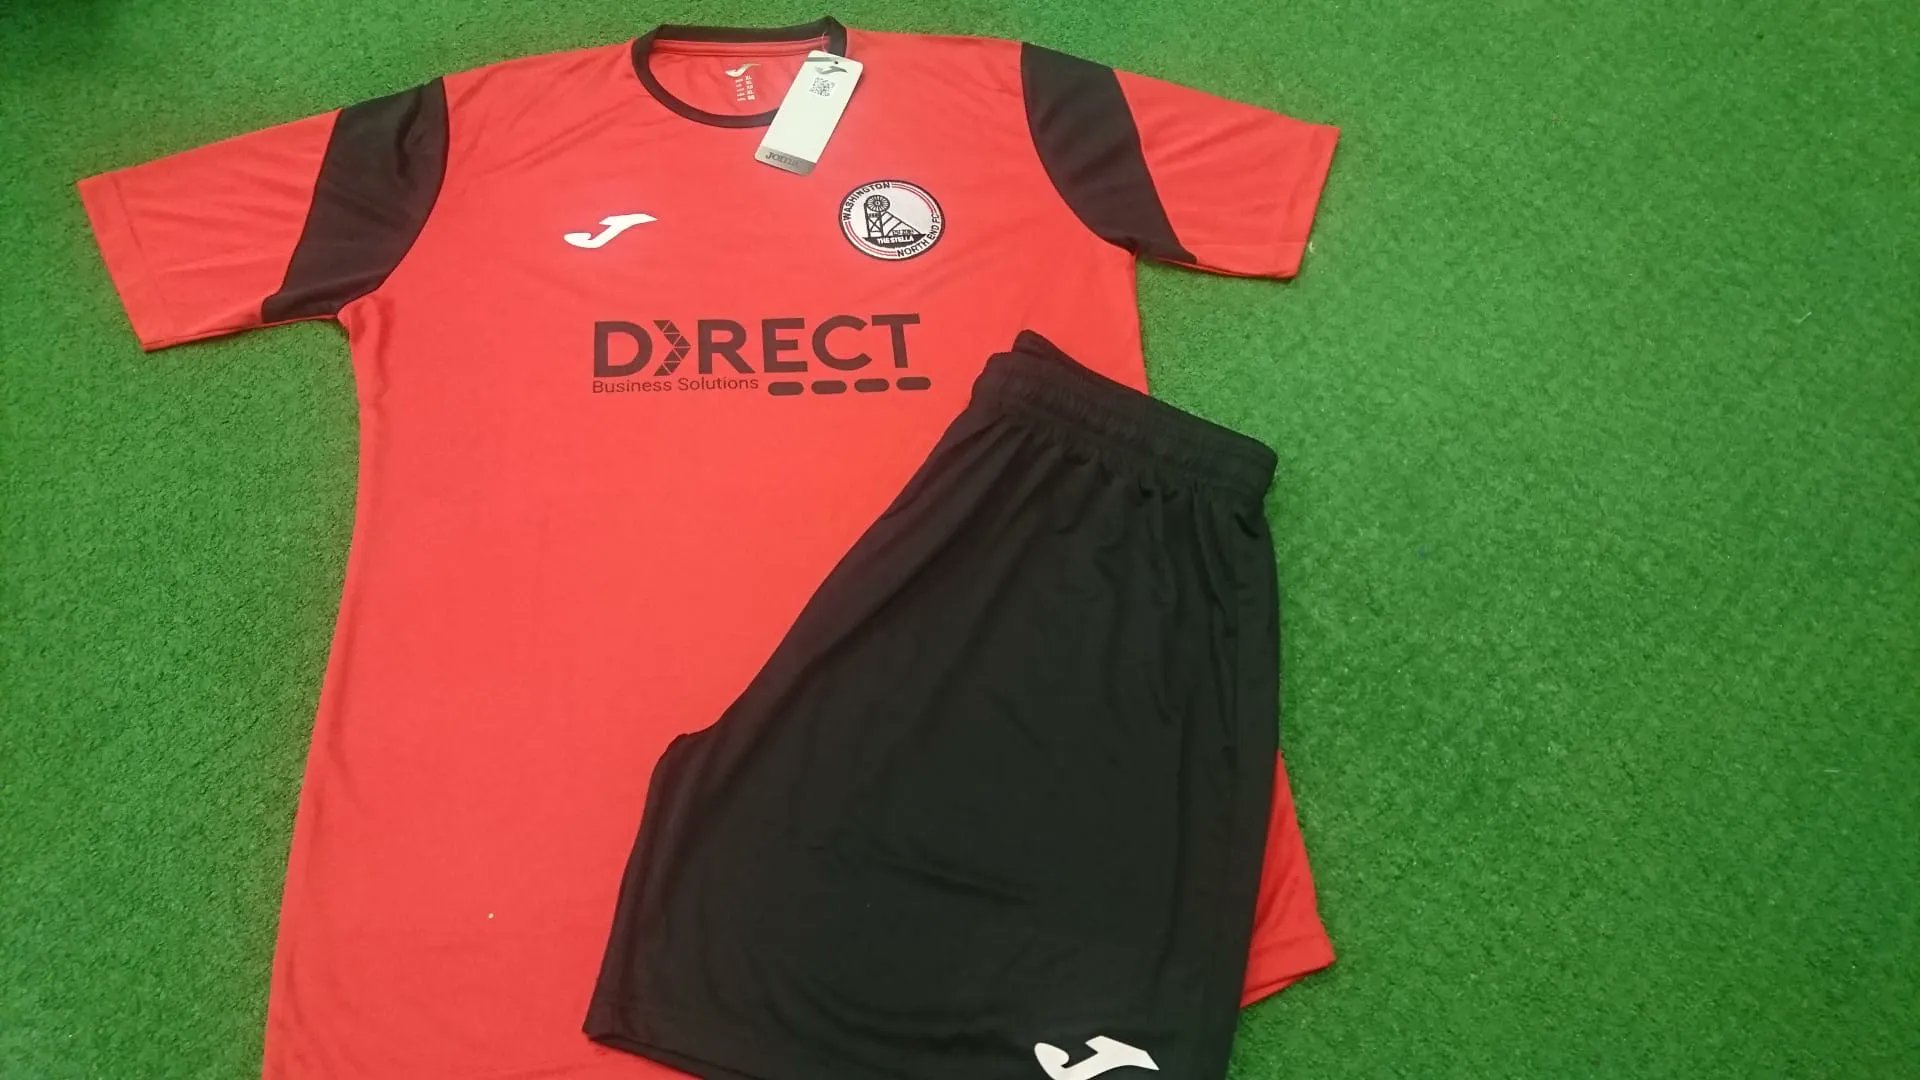 Bolam Premier Sports on Twitter: "Shout out to North End FC, for ordering Joma's New Phoenix Sets, complete with embroidered badge, printed sponsor and printed numbers! See Joma's range: https://t.co/ts3PCiF4QM #